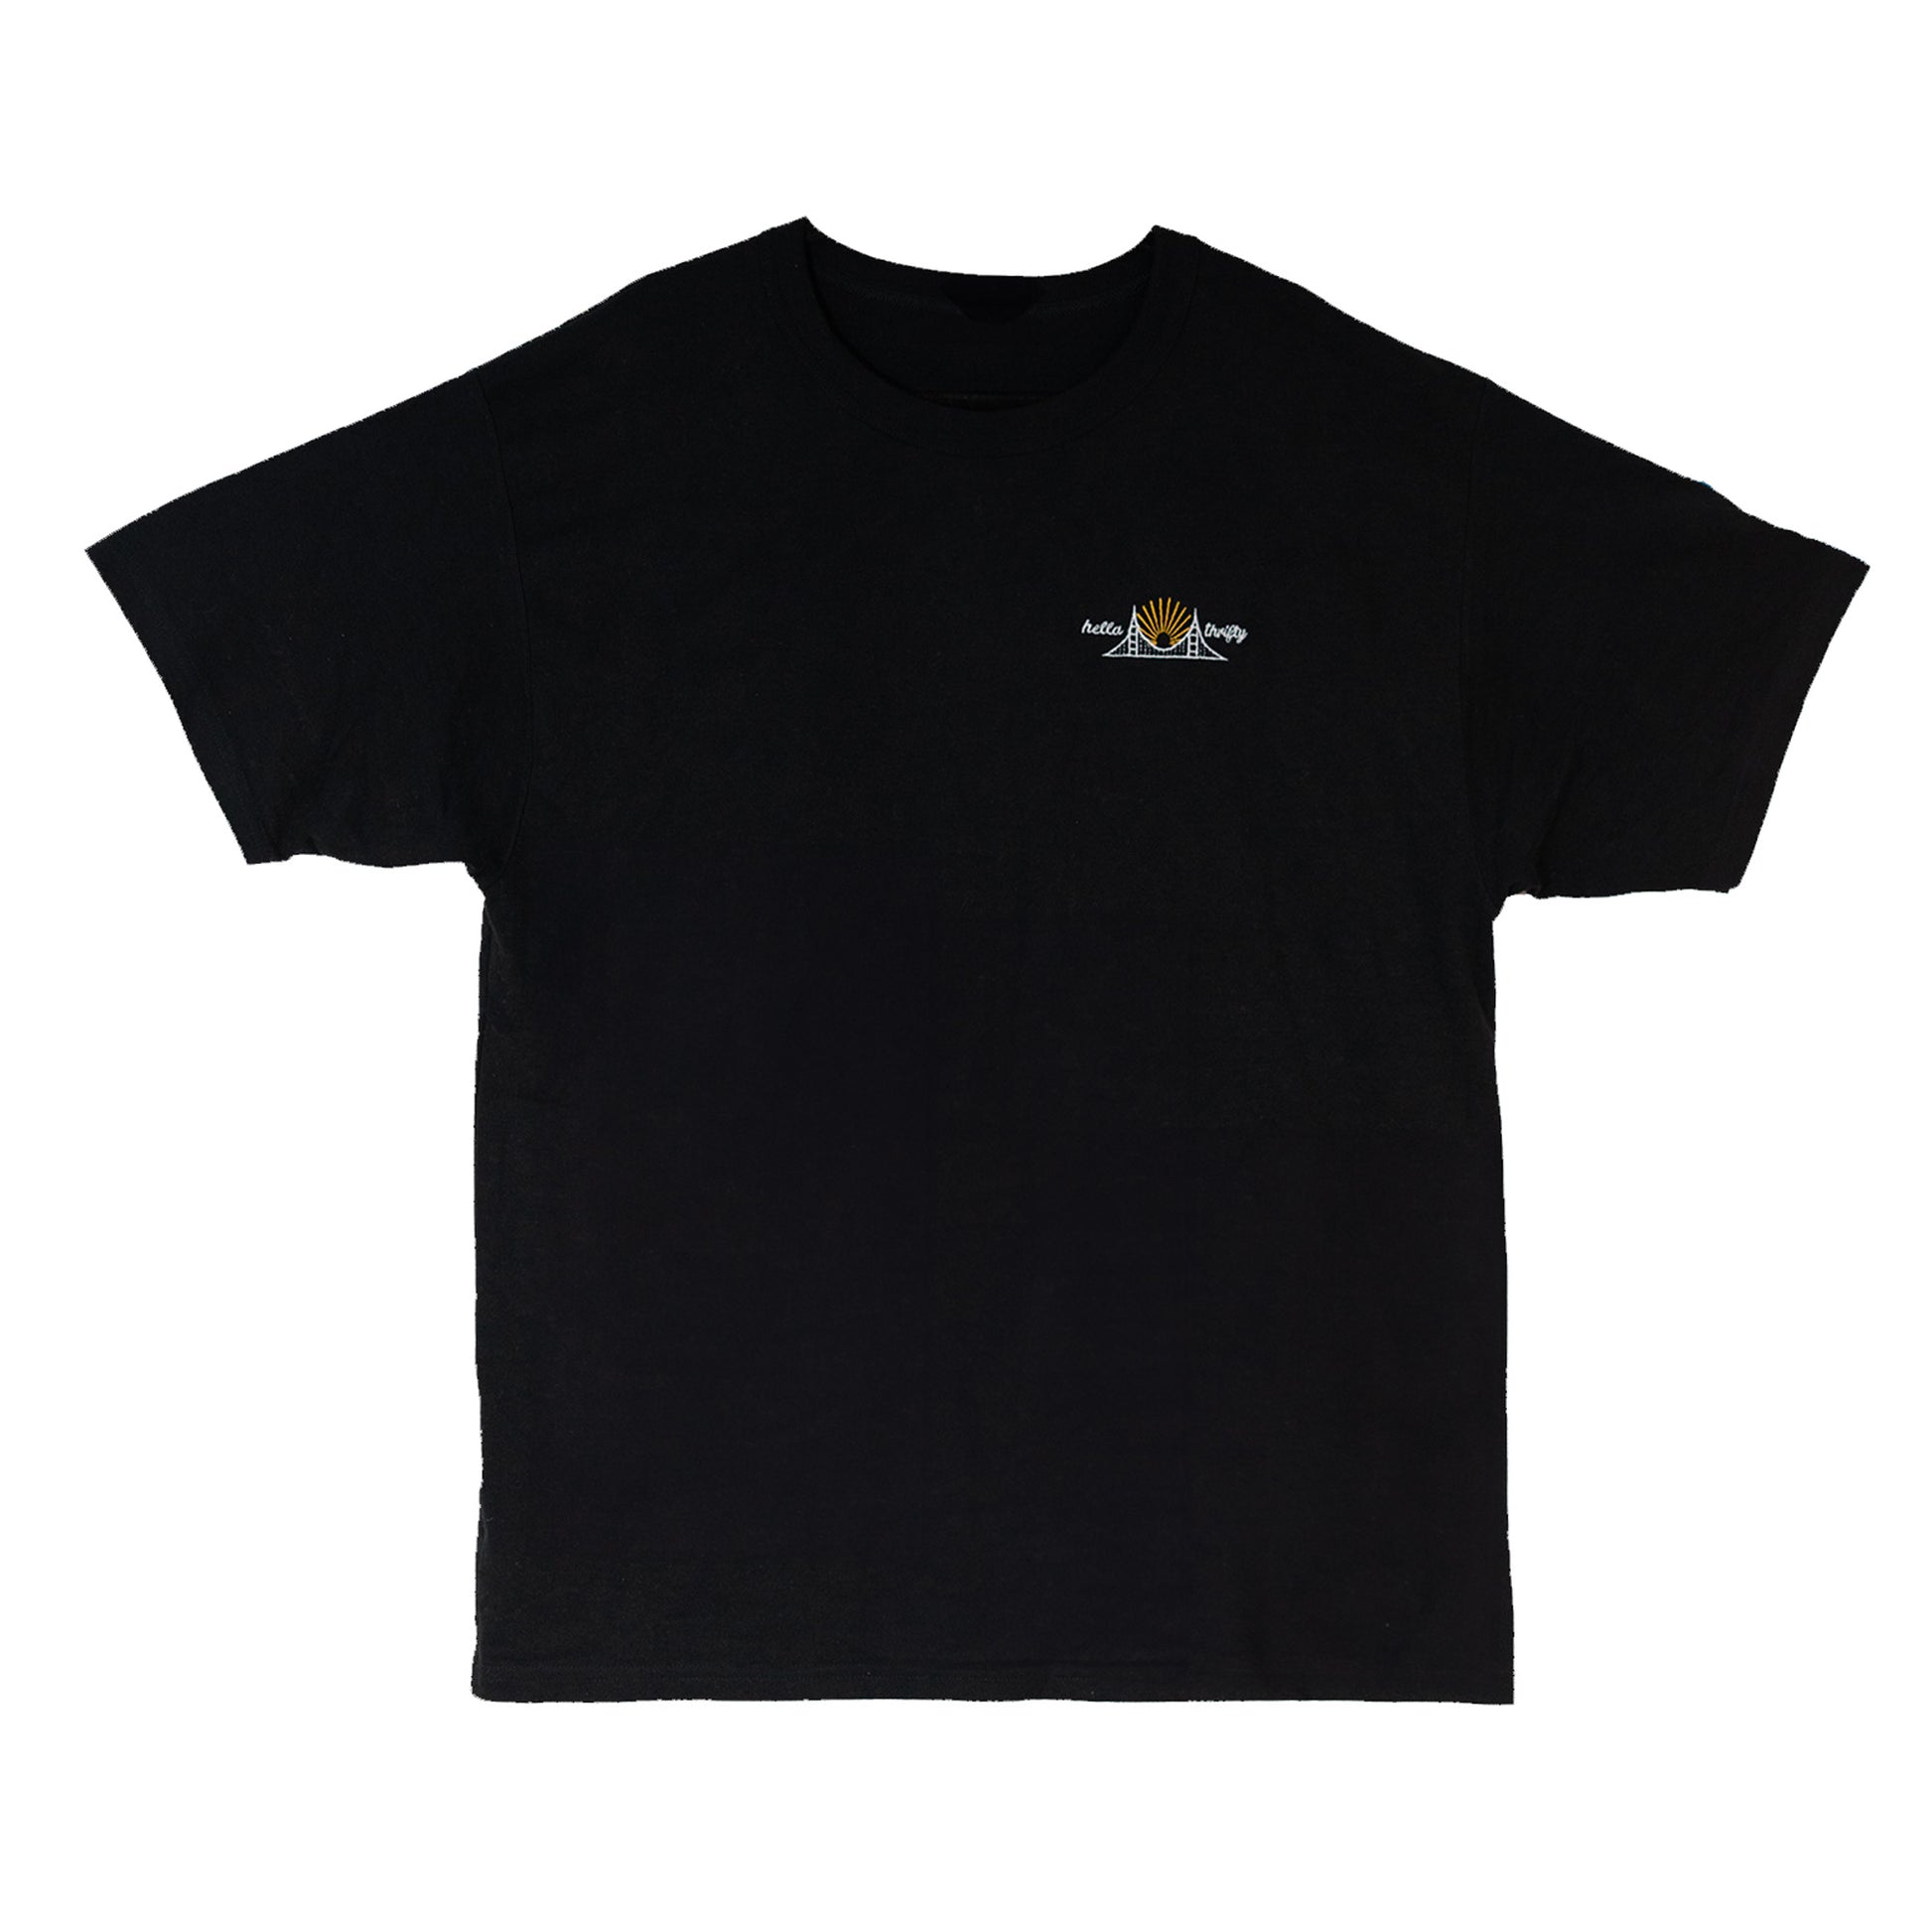 Black t-shirt with hella thrifty bay bridge logo embroidered to left chest.